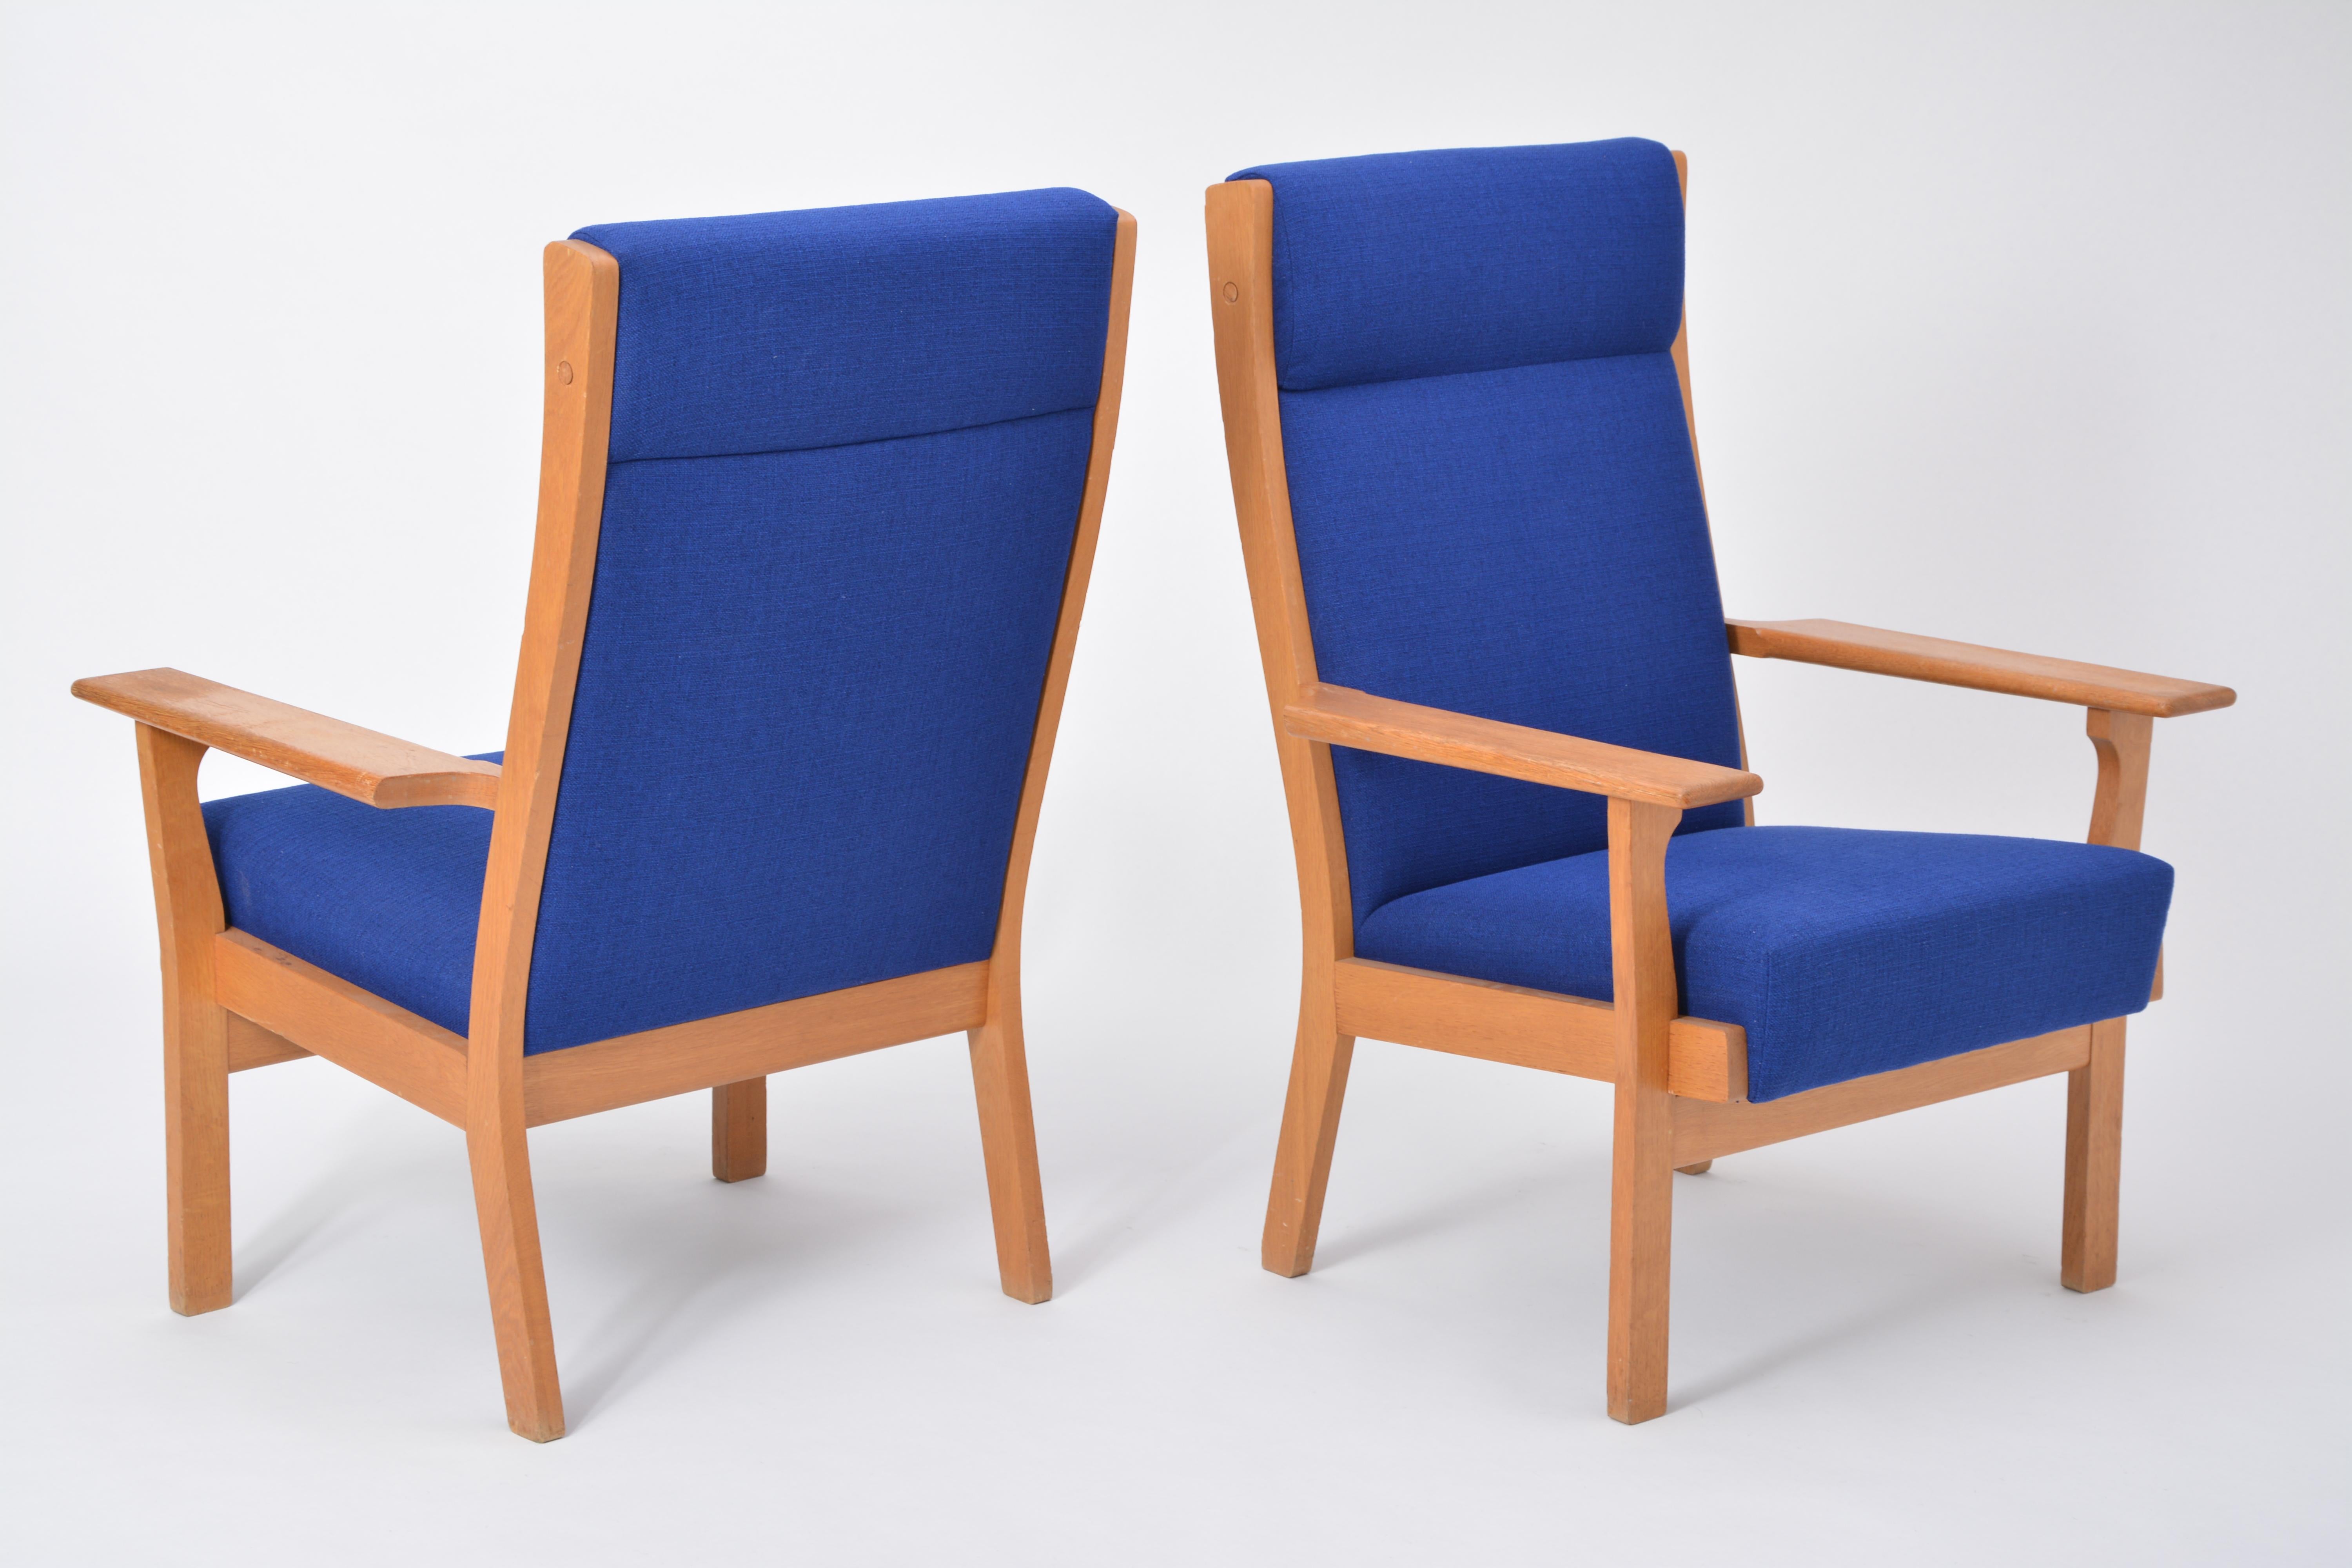 Oak Set of Two Danish Mid-Century Modern GE 181 a Chairs by Hans Wegner for GETAMA For Sale